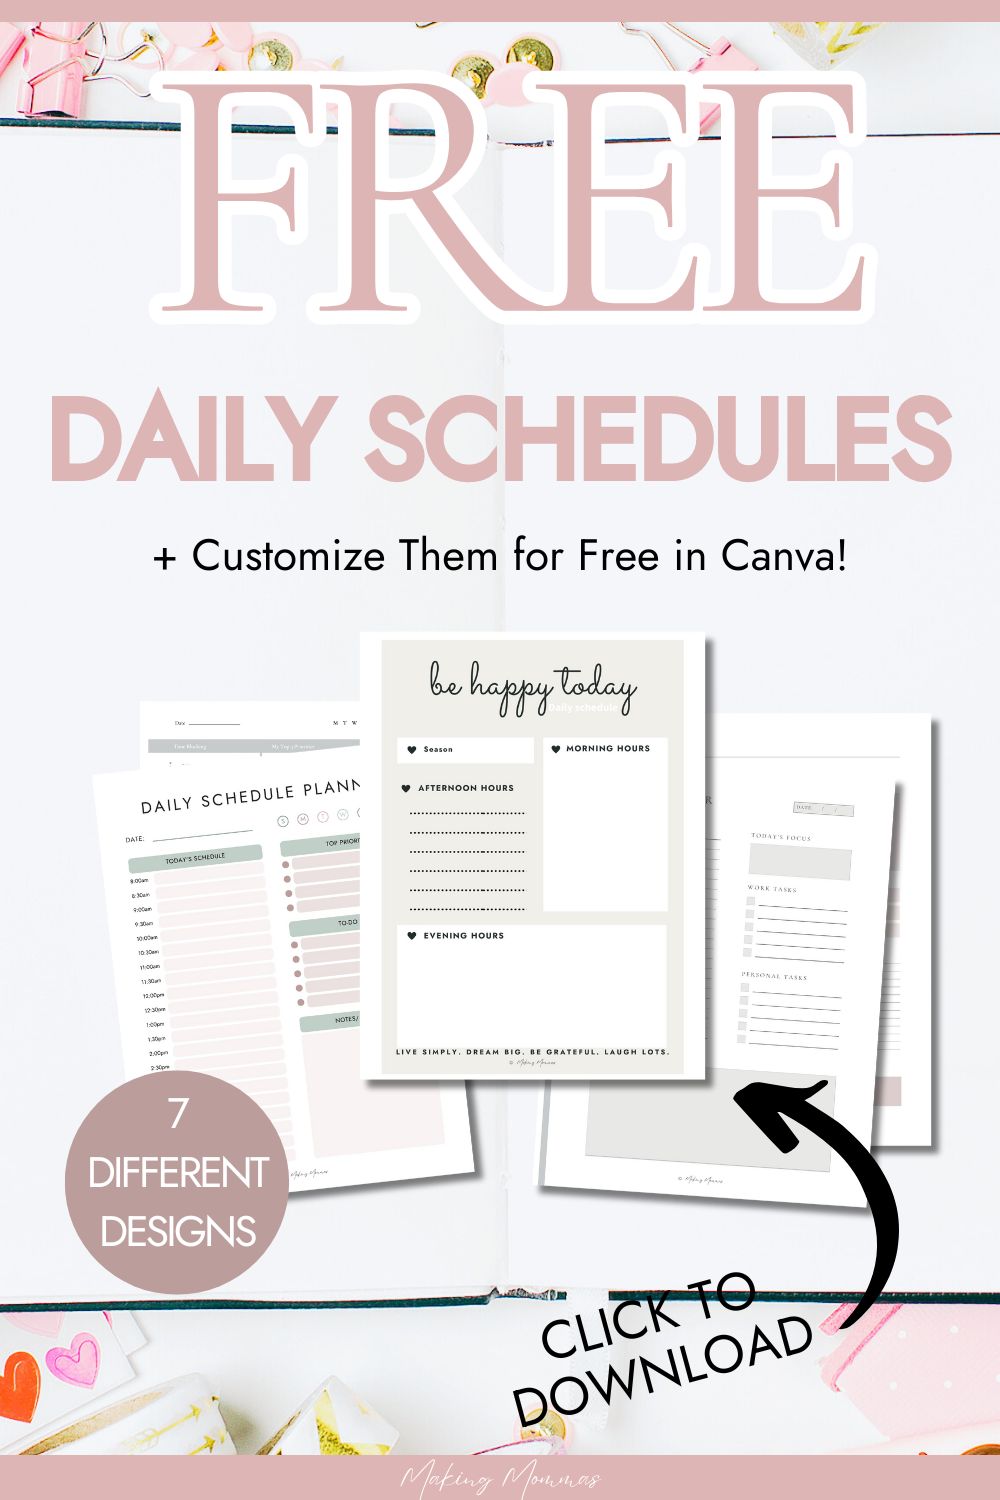 Pin image that reads "Free daily schedules plus customize them for free in Canva!" with an image of the schedules.